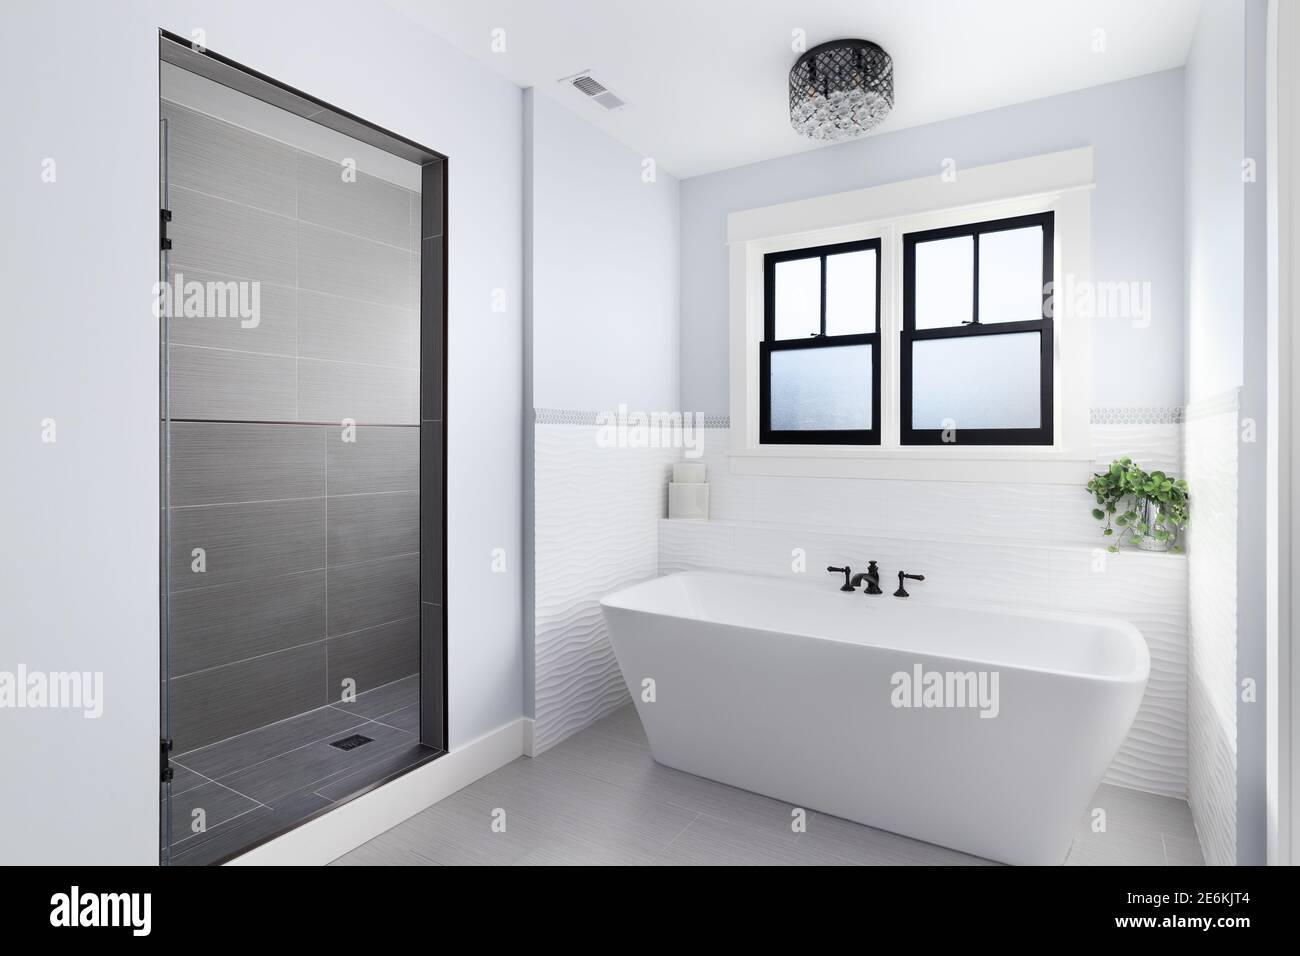 A beautiful, luxury bathroom with a light hanging above a white Fleurco standalone tub and black faucet surrounded by tiles and a marble tiled shower. Stock Photo